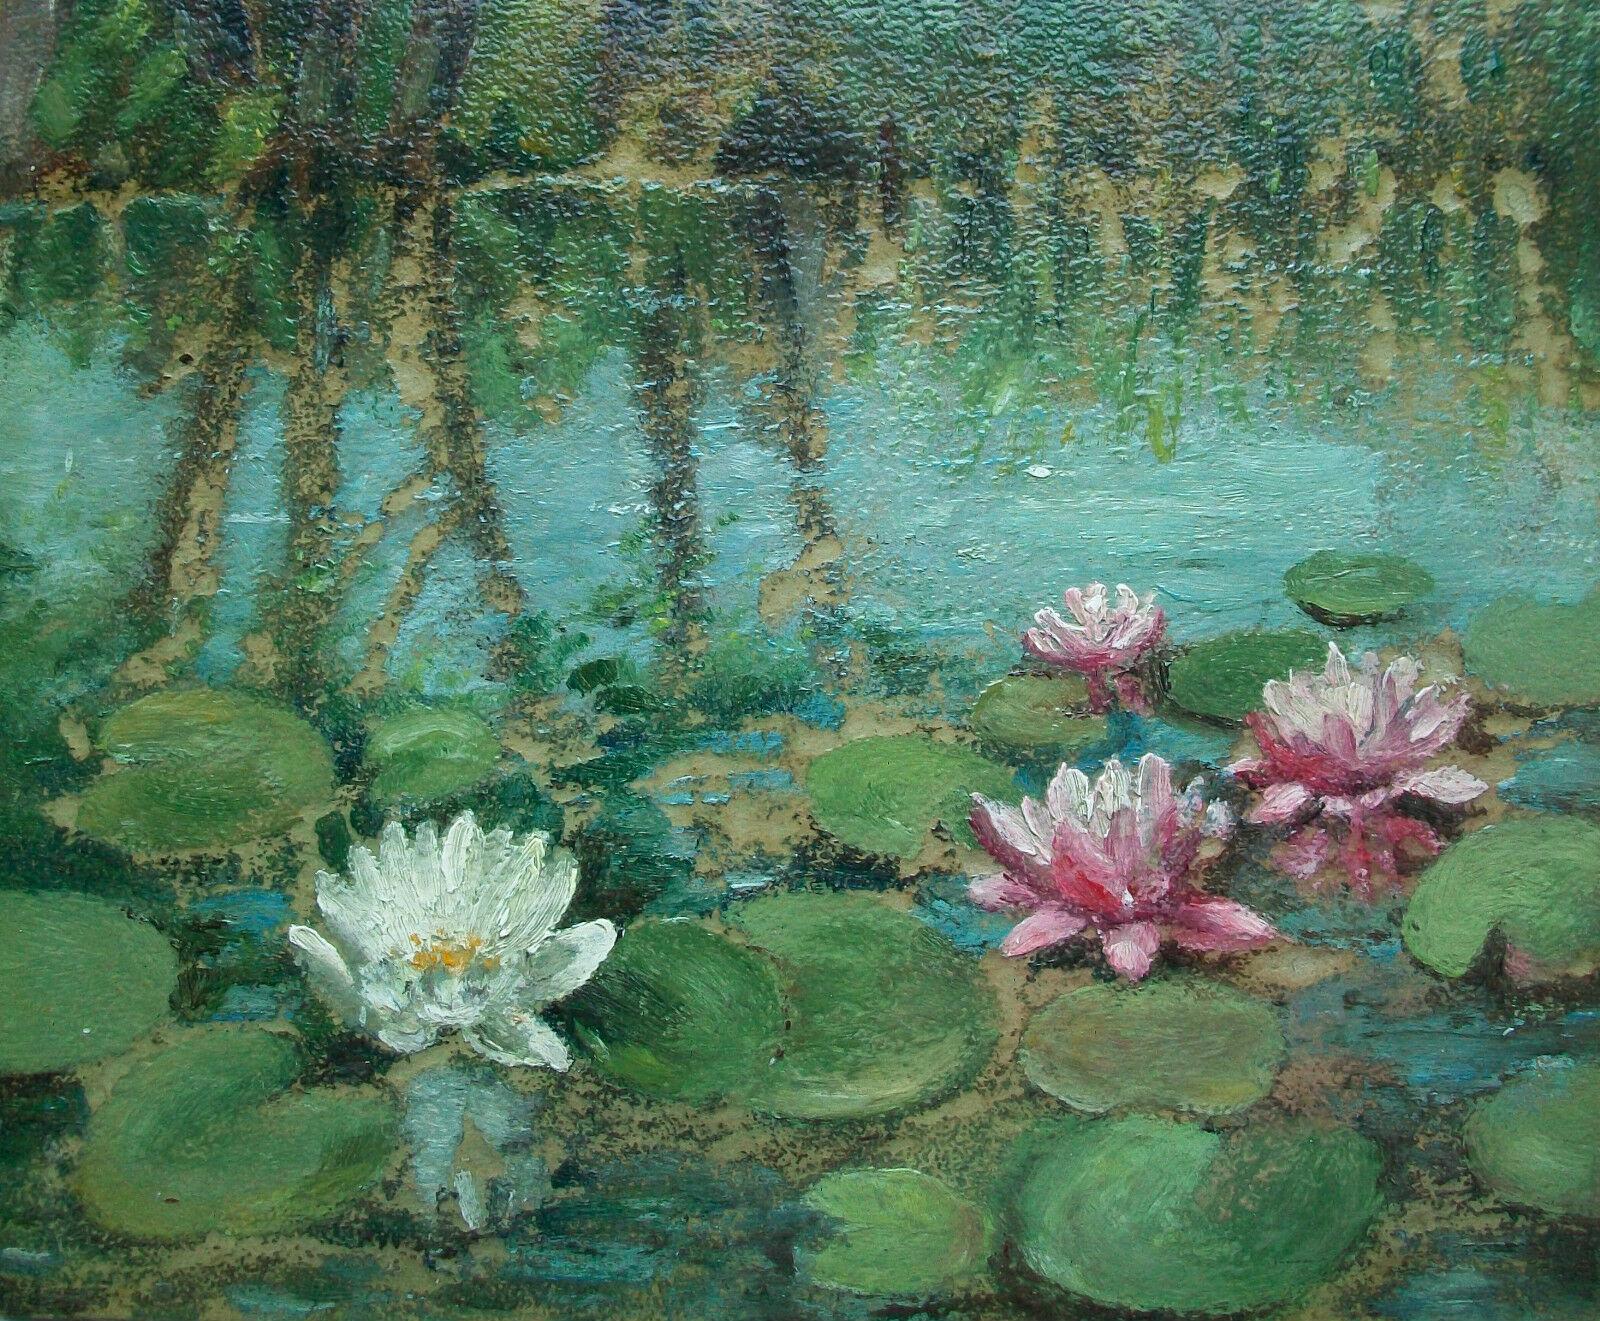 Impressionist style Water Lilies oil painting on un-primed pressed paper panel - gloss varnish - unsigned - unframed - mid-20th century.

Good vintage condition - minor loss - no restoration - minor scuffs - heavy gloss varnish - signs of age and